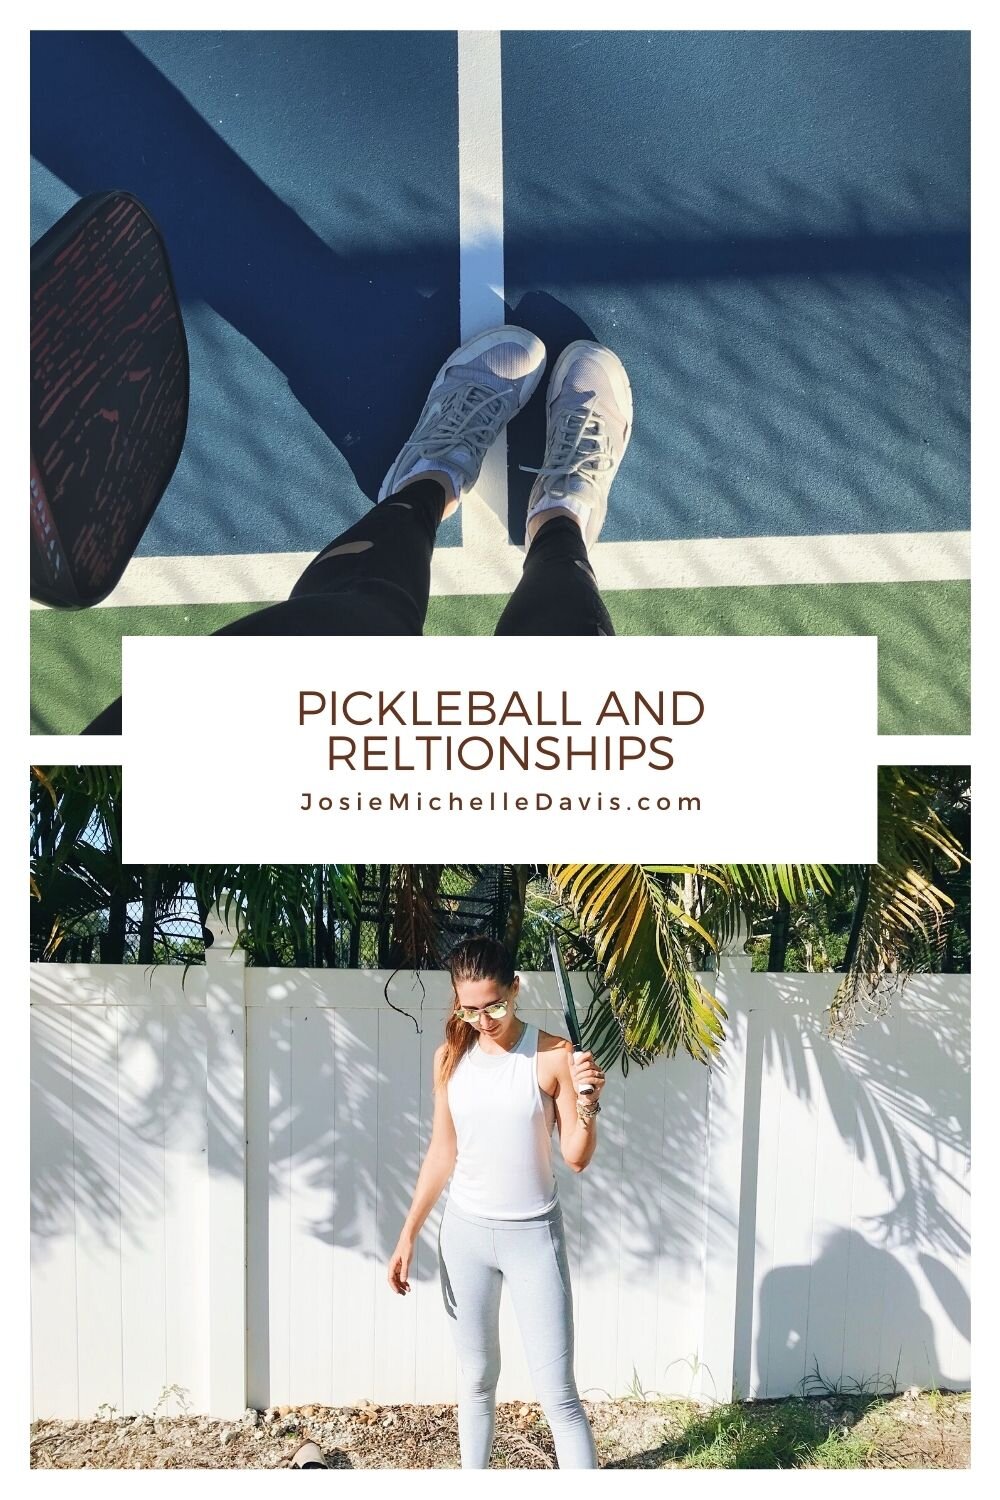 Pickleball court and paddles